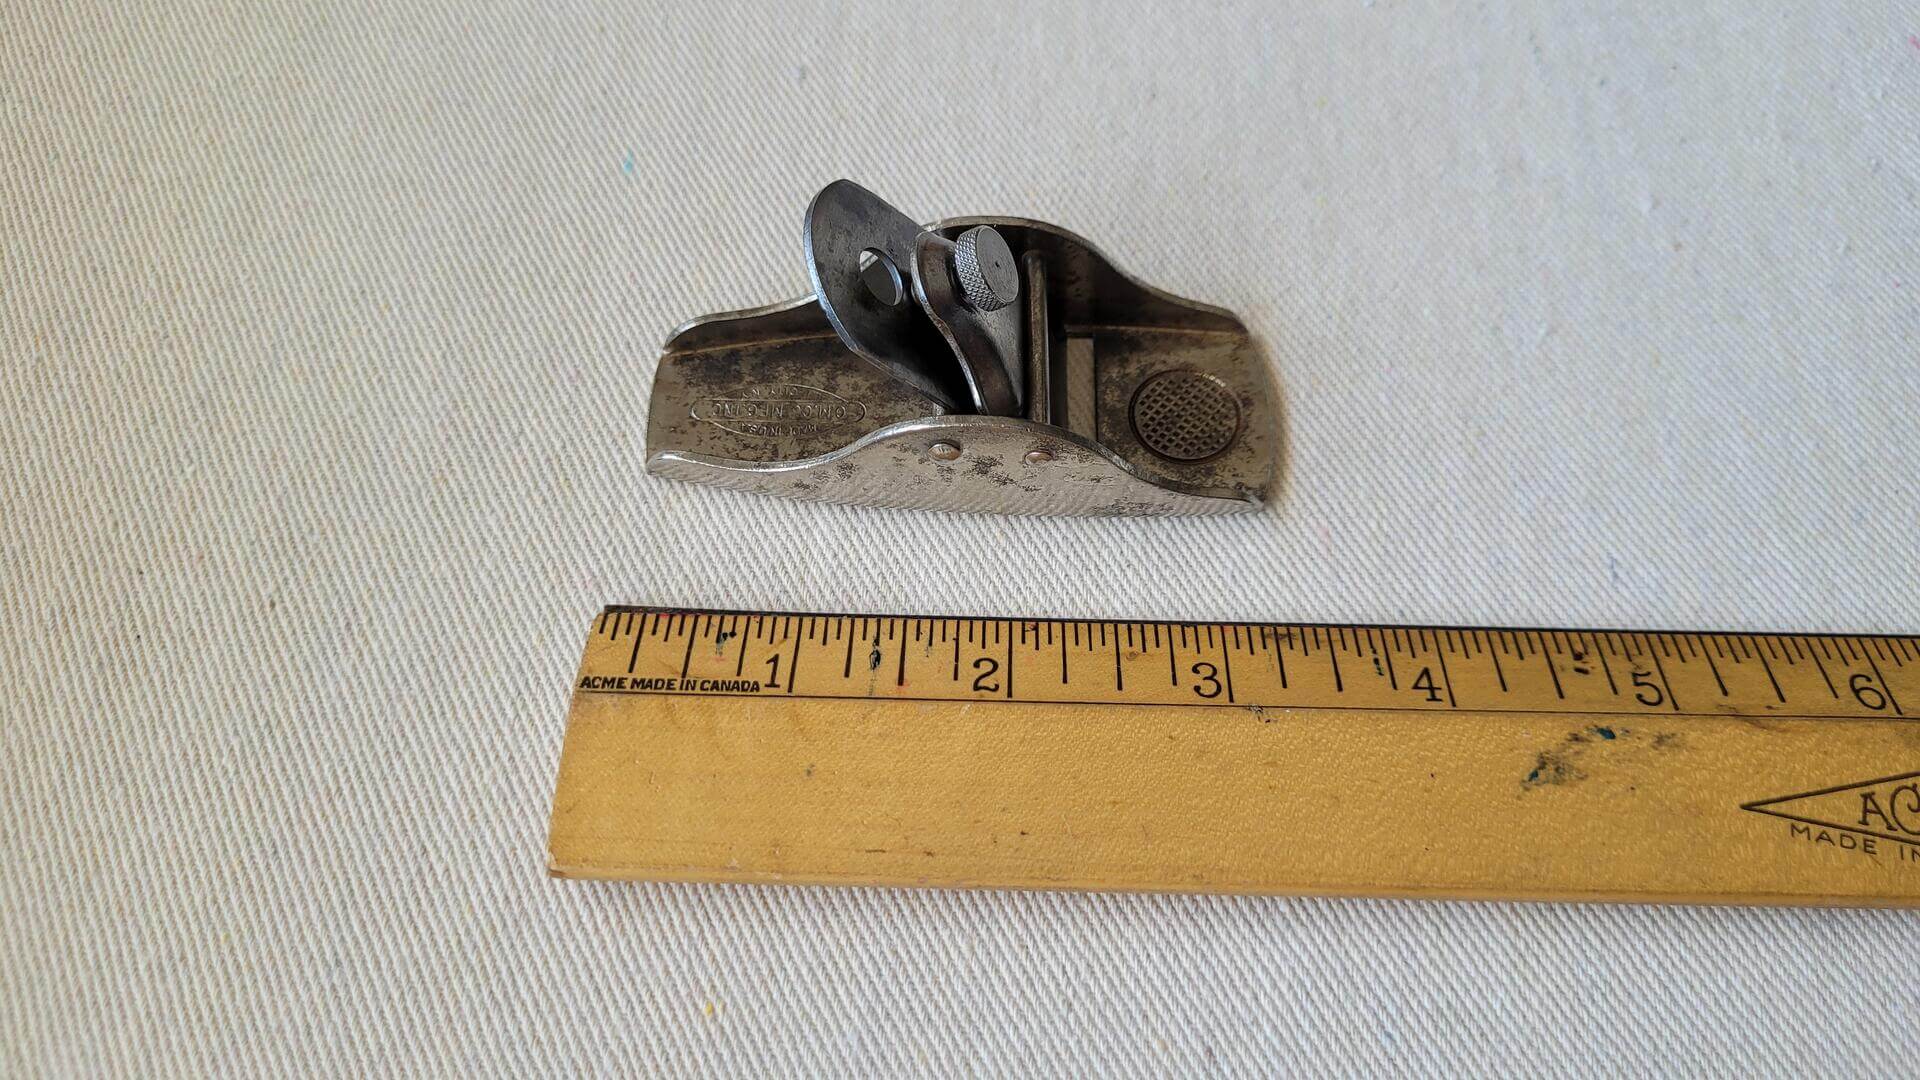 Vintage thumb block miniature plane by G.M. Co. Mfg. Inc. Long Island City NY. Antique mid century made in USA collectible carpentry & woodworking edge tool